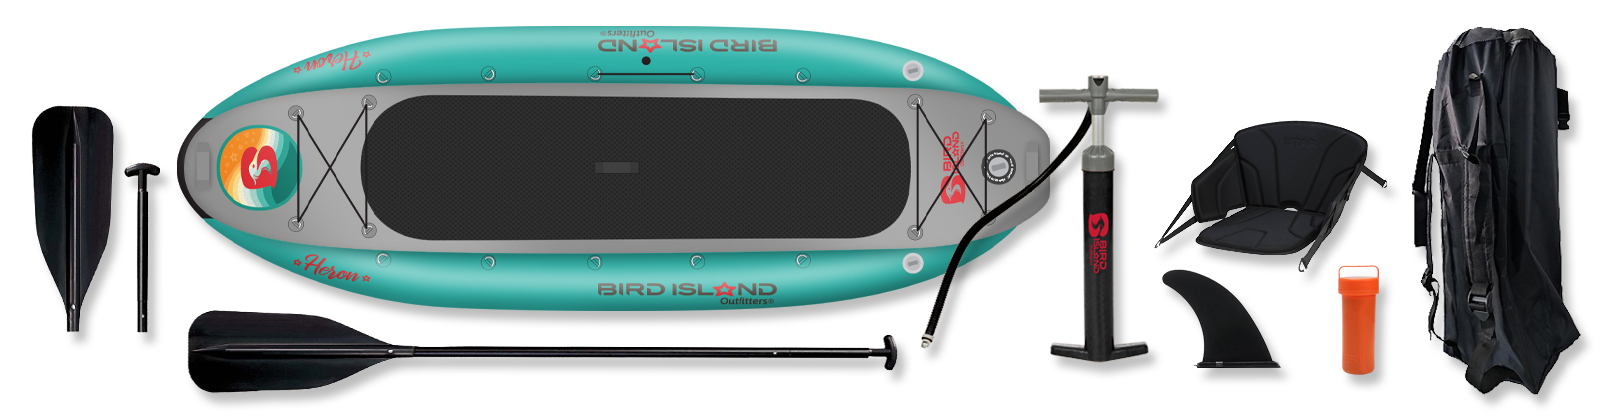 Inflatable Paddle Boards from Bird Island Outfitters Austin Texas